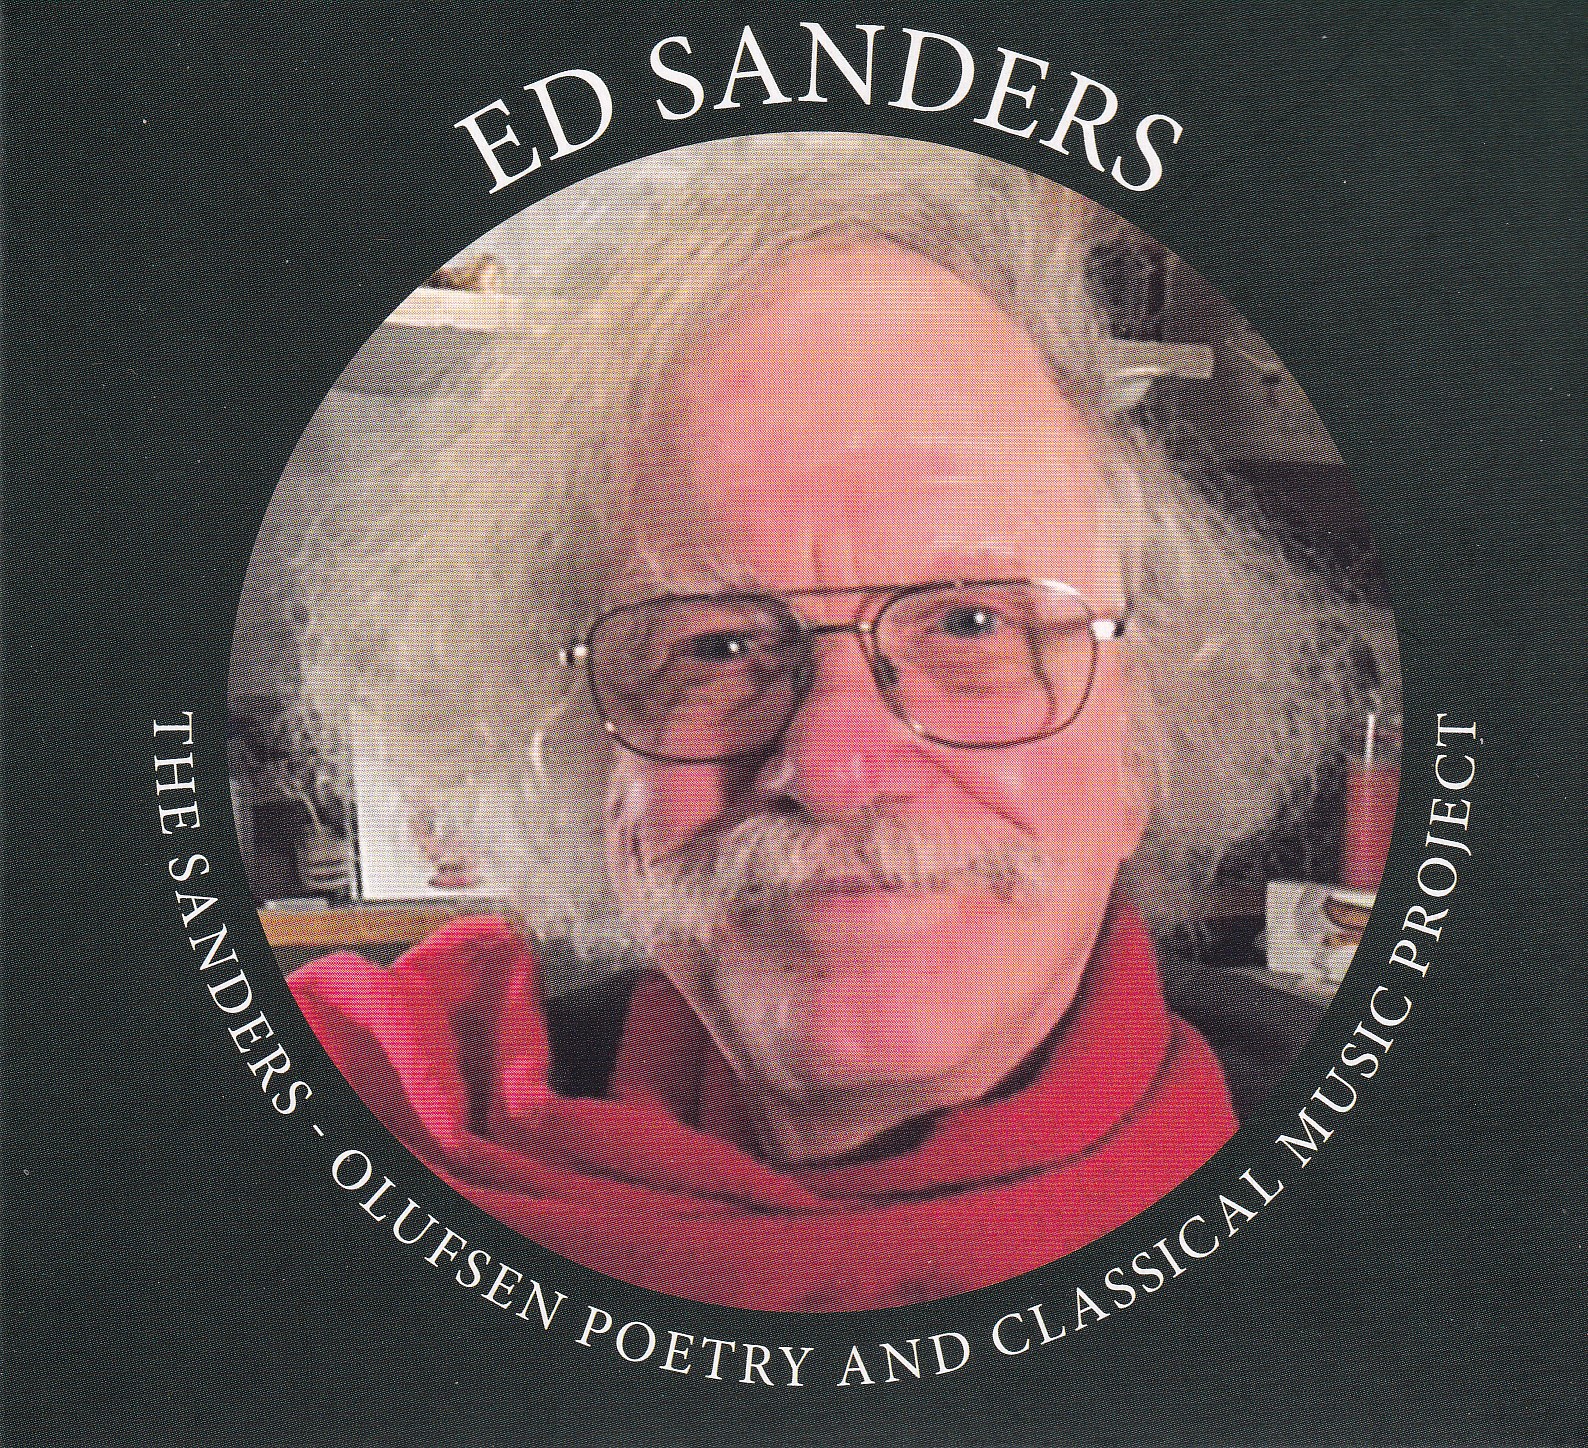 Ed and Miriam Sanders: Poets, Artists, and Change-Makers